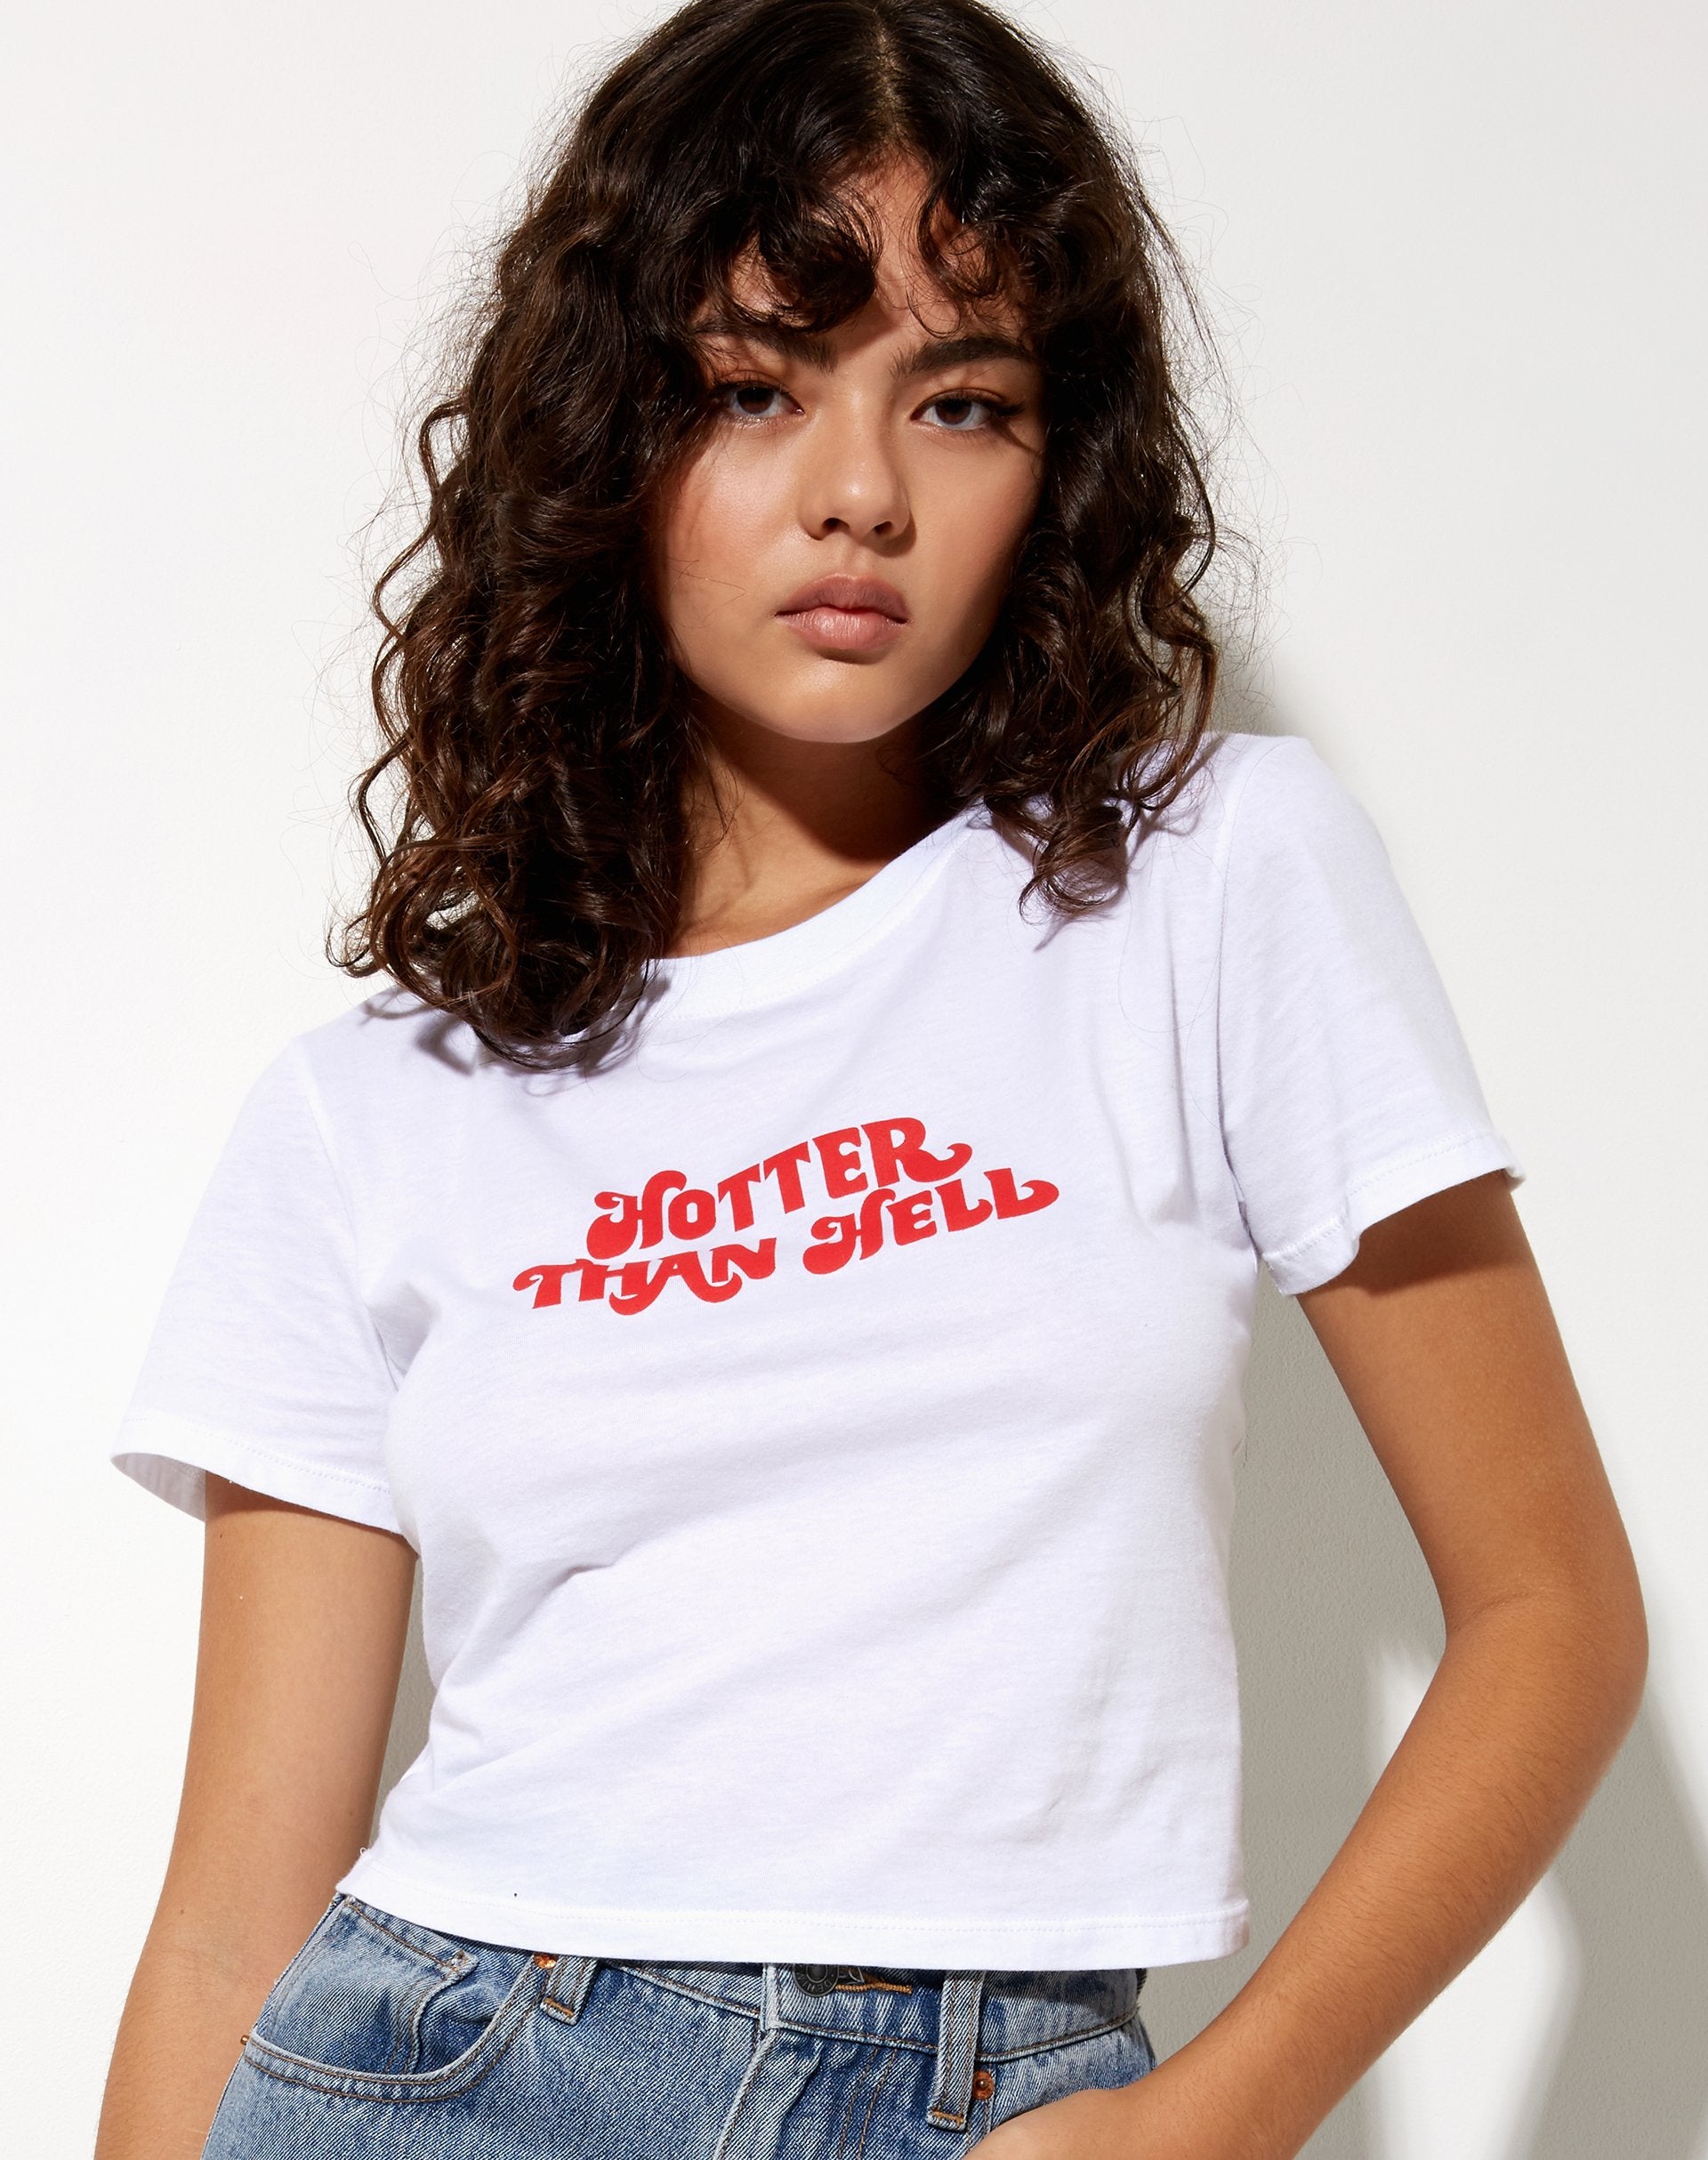 Shrunk Tee in White Hotter Than Hell